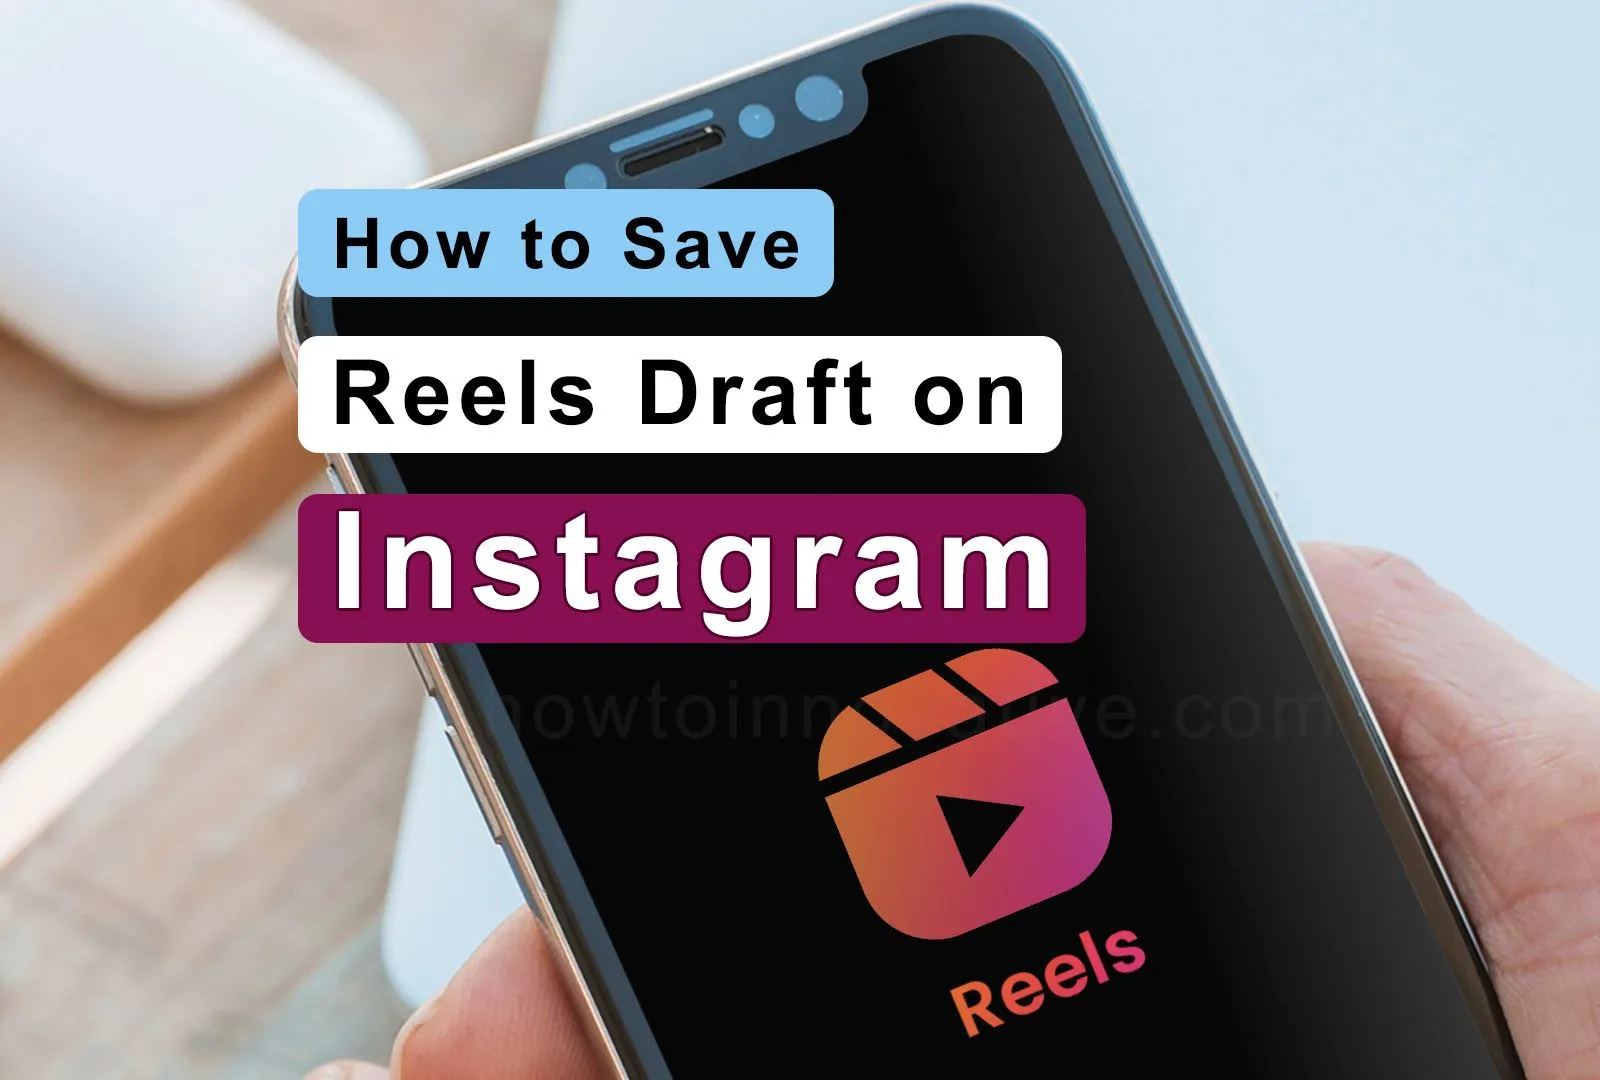 How to Save Reels Draft on Instagram